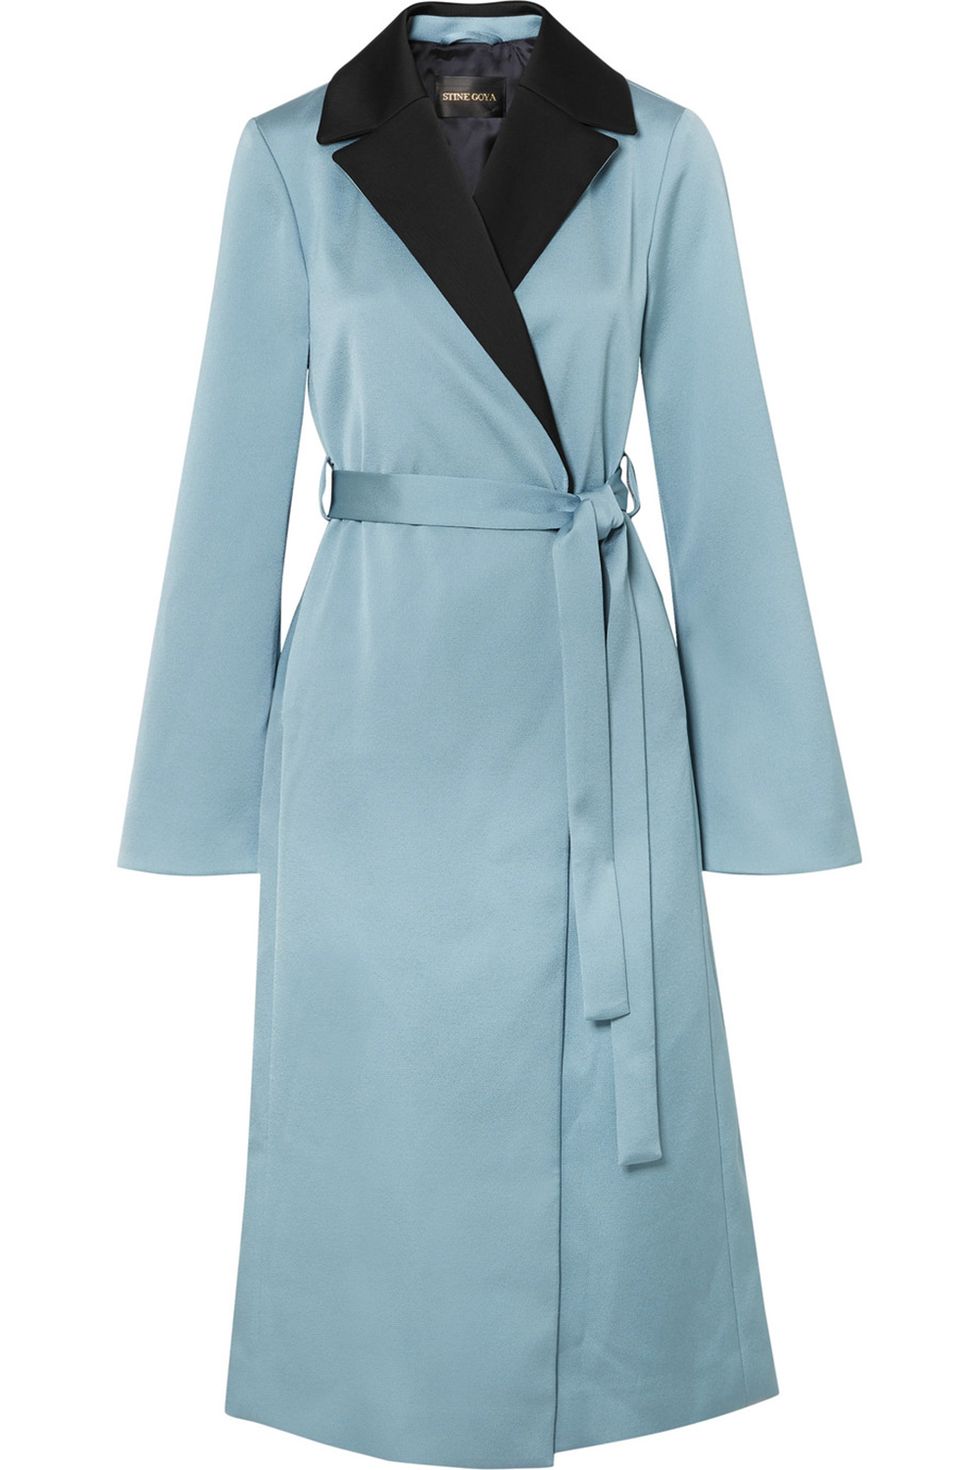 Clothing, Coat, Trench coat, Blue, Outerwear, Overcoat, Turquoise, Sleeve, Dress, Day dress, 